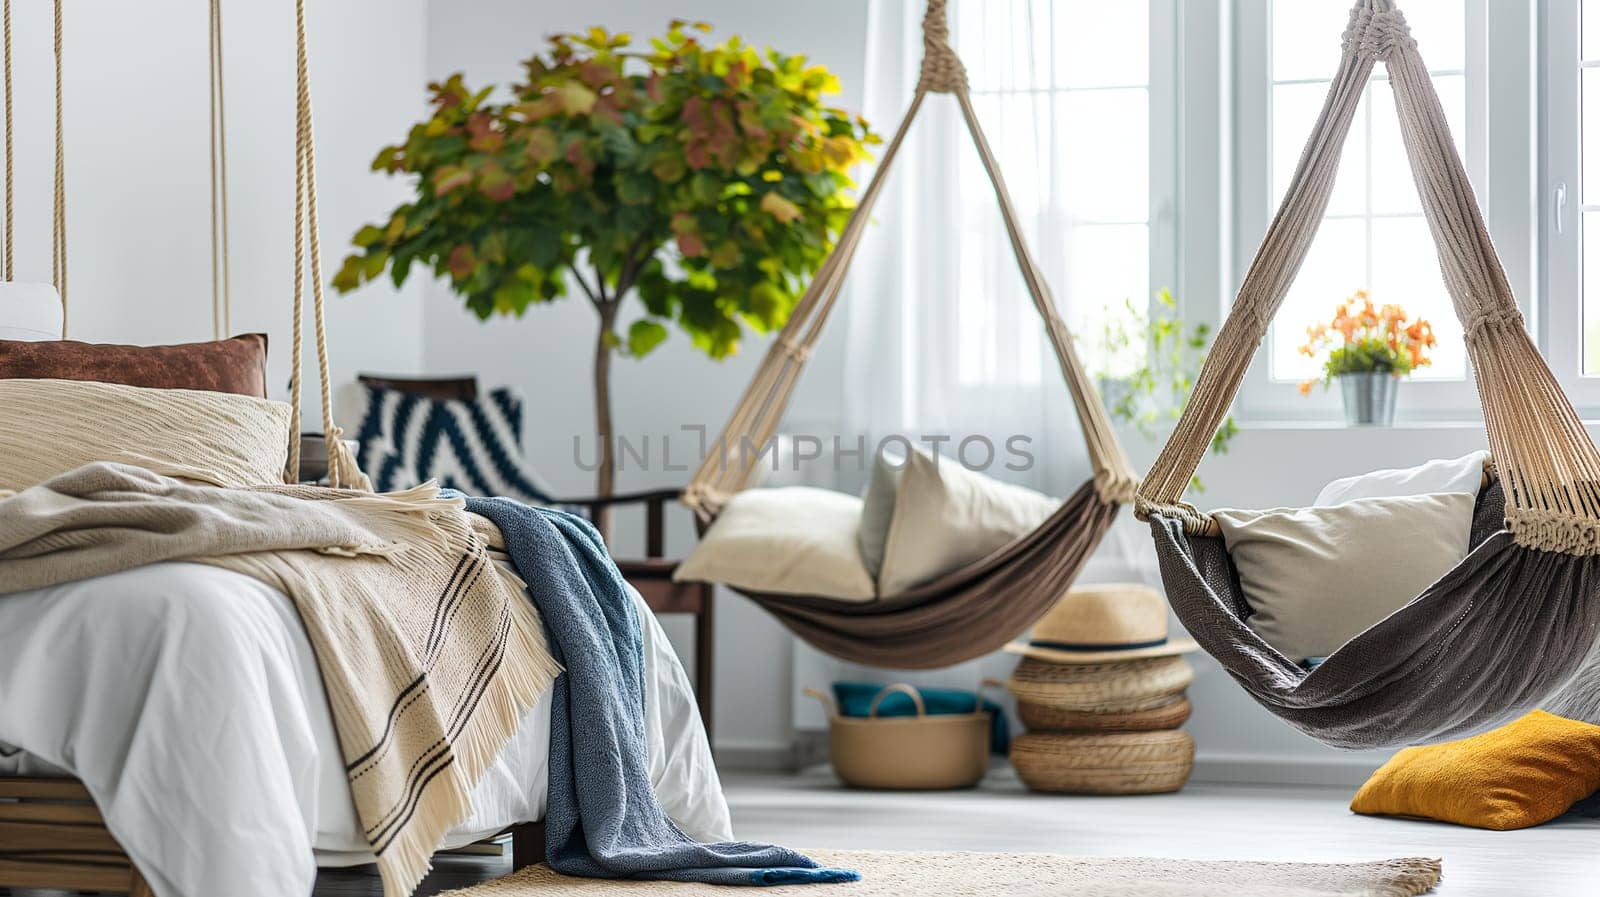 Cozy Bedroom Interior With Hanging Hammocks and Bright Decor by chrisroll